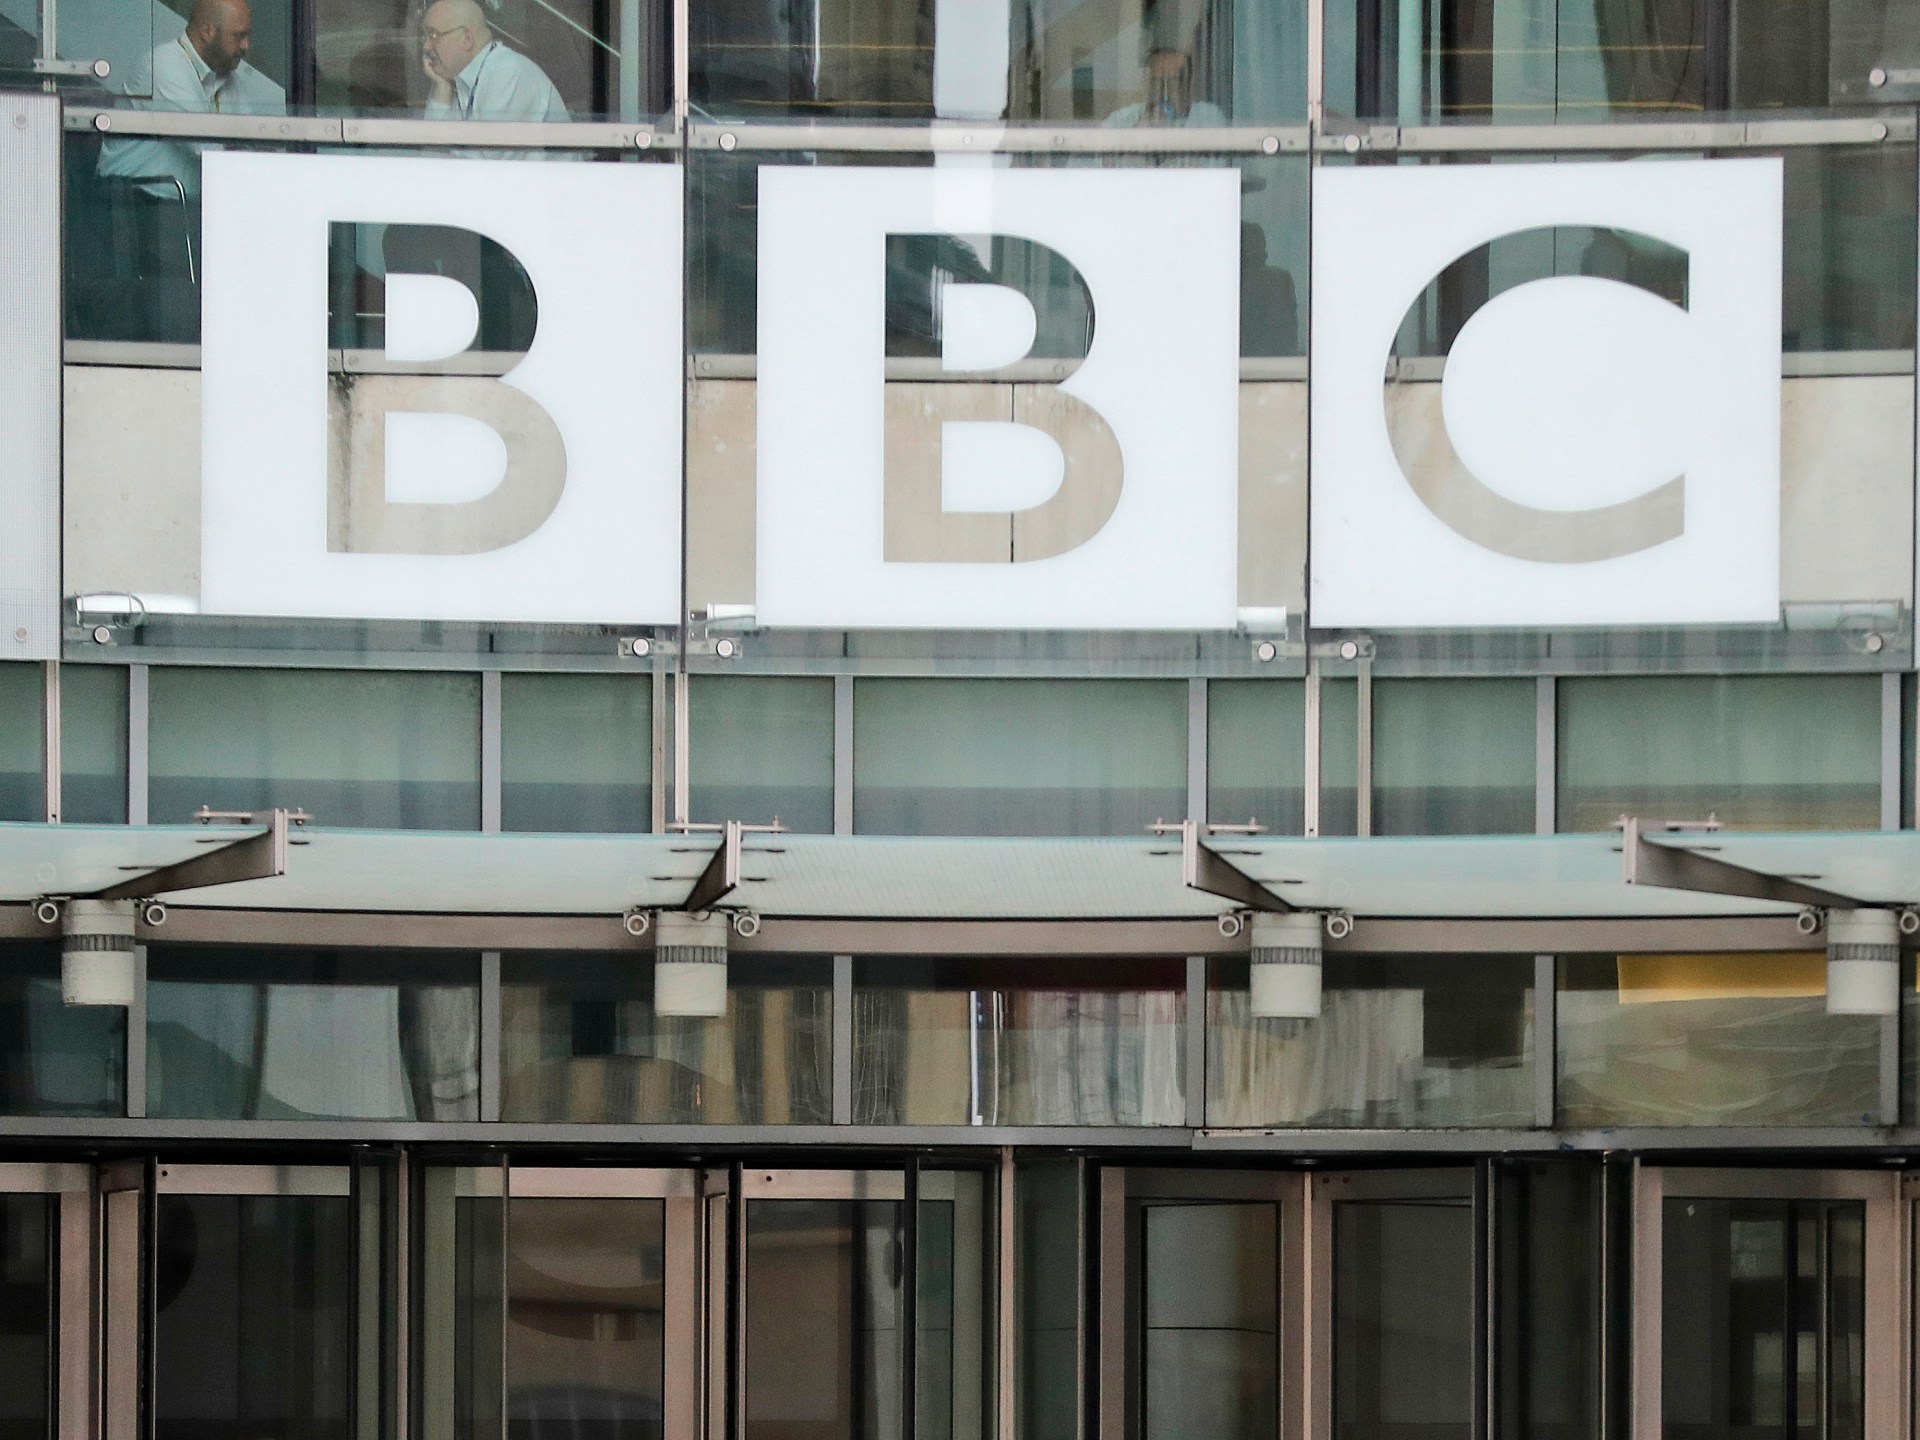 BBC suspends presenter accused of paying teen for explicit images